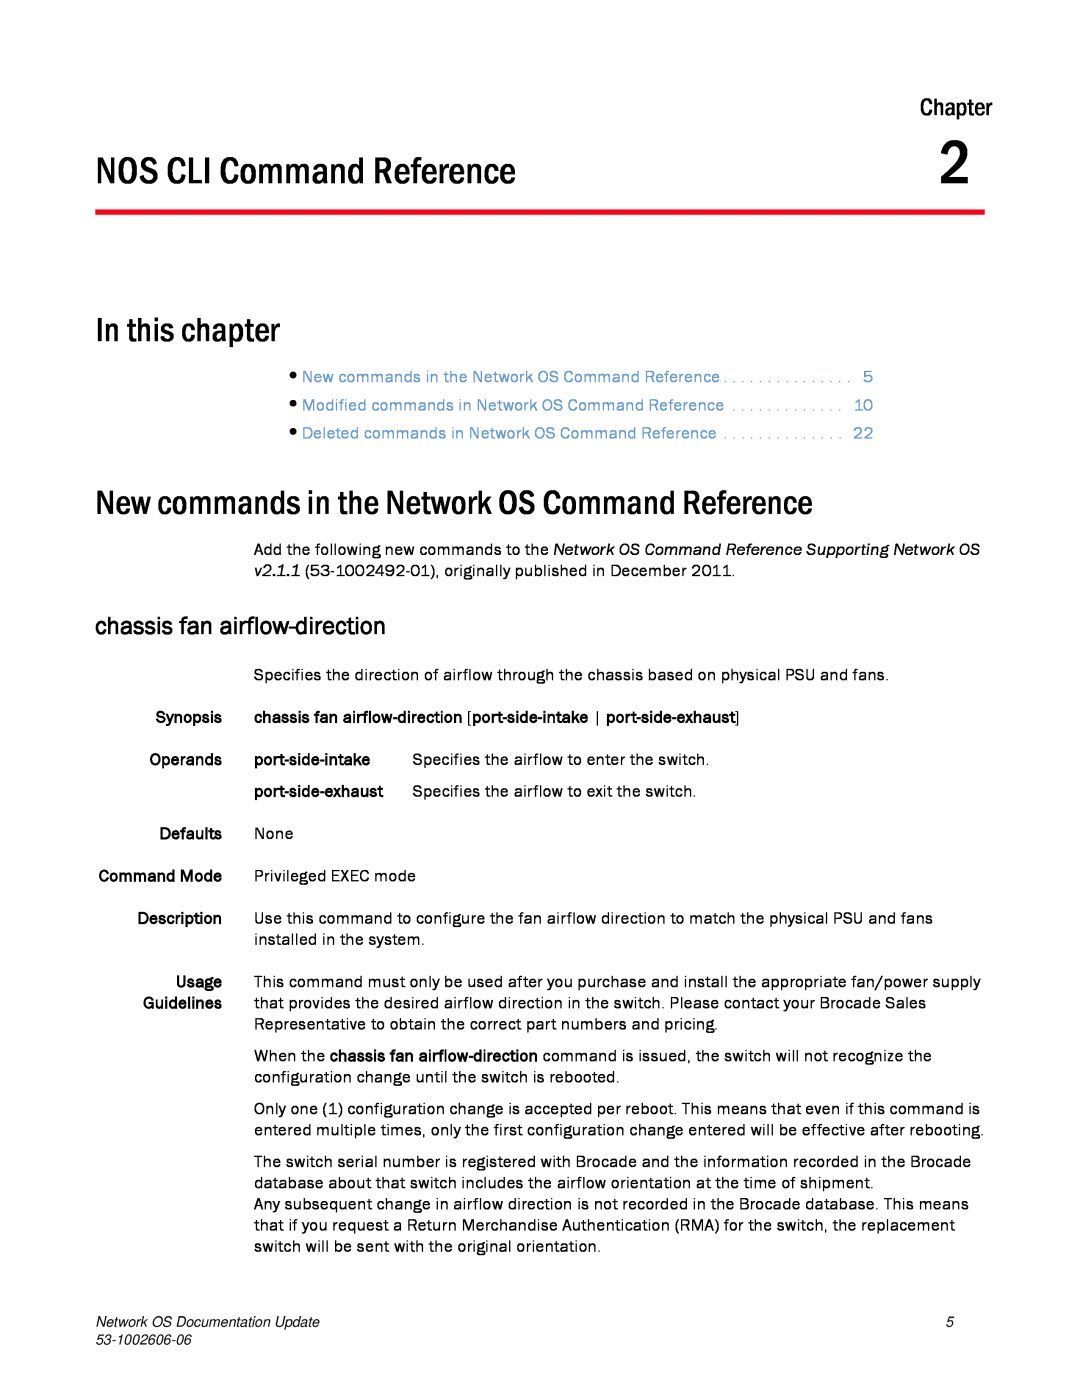 Brocade Communications Systems 2.1 NOS CLI Command Reference, New commands in the Network OS Command Reference, Chapter 